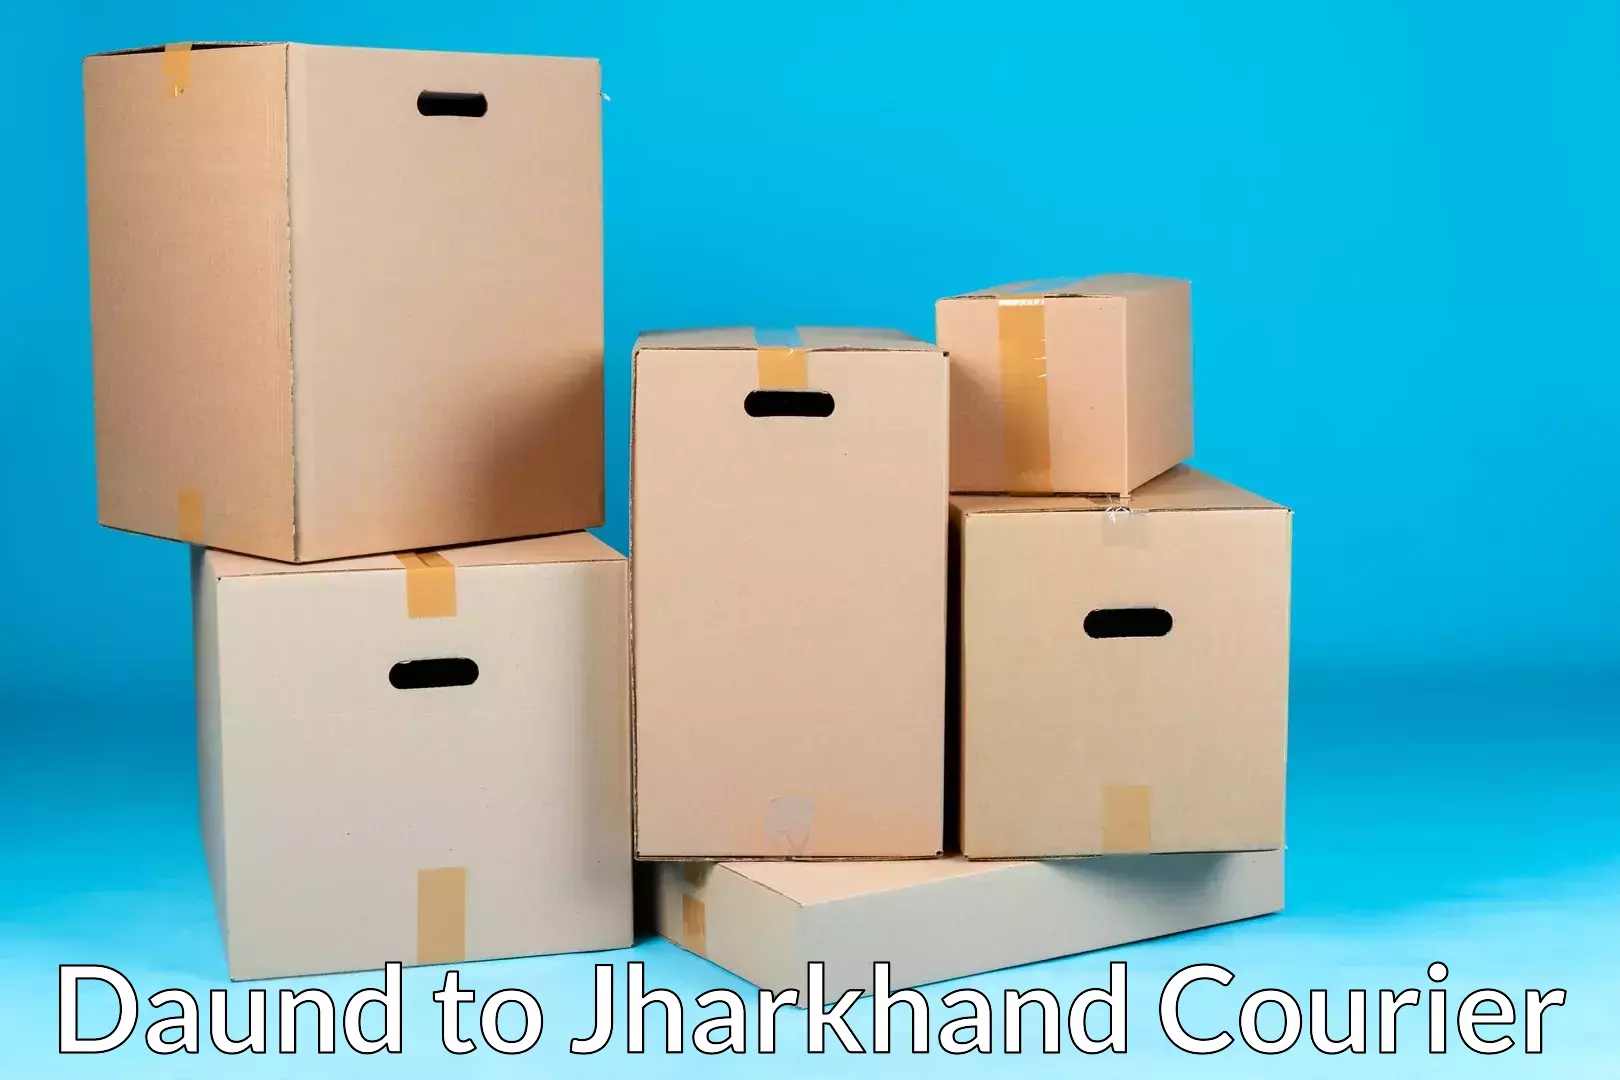 Furniture relocation experts Daund to Jharkhand